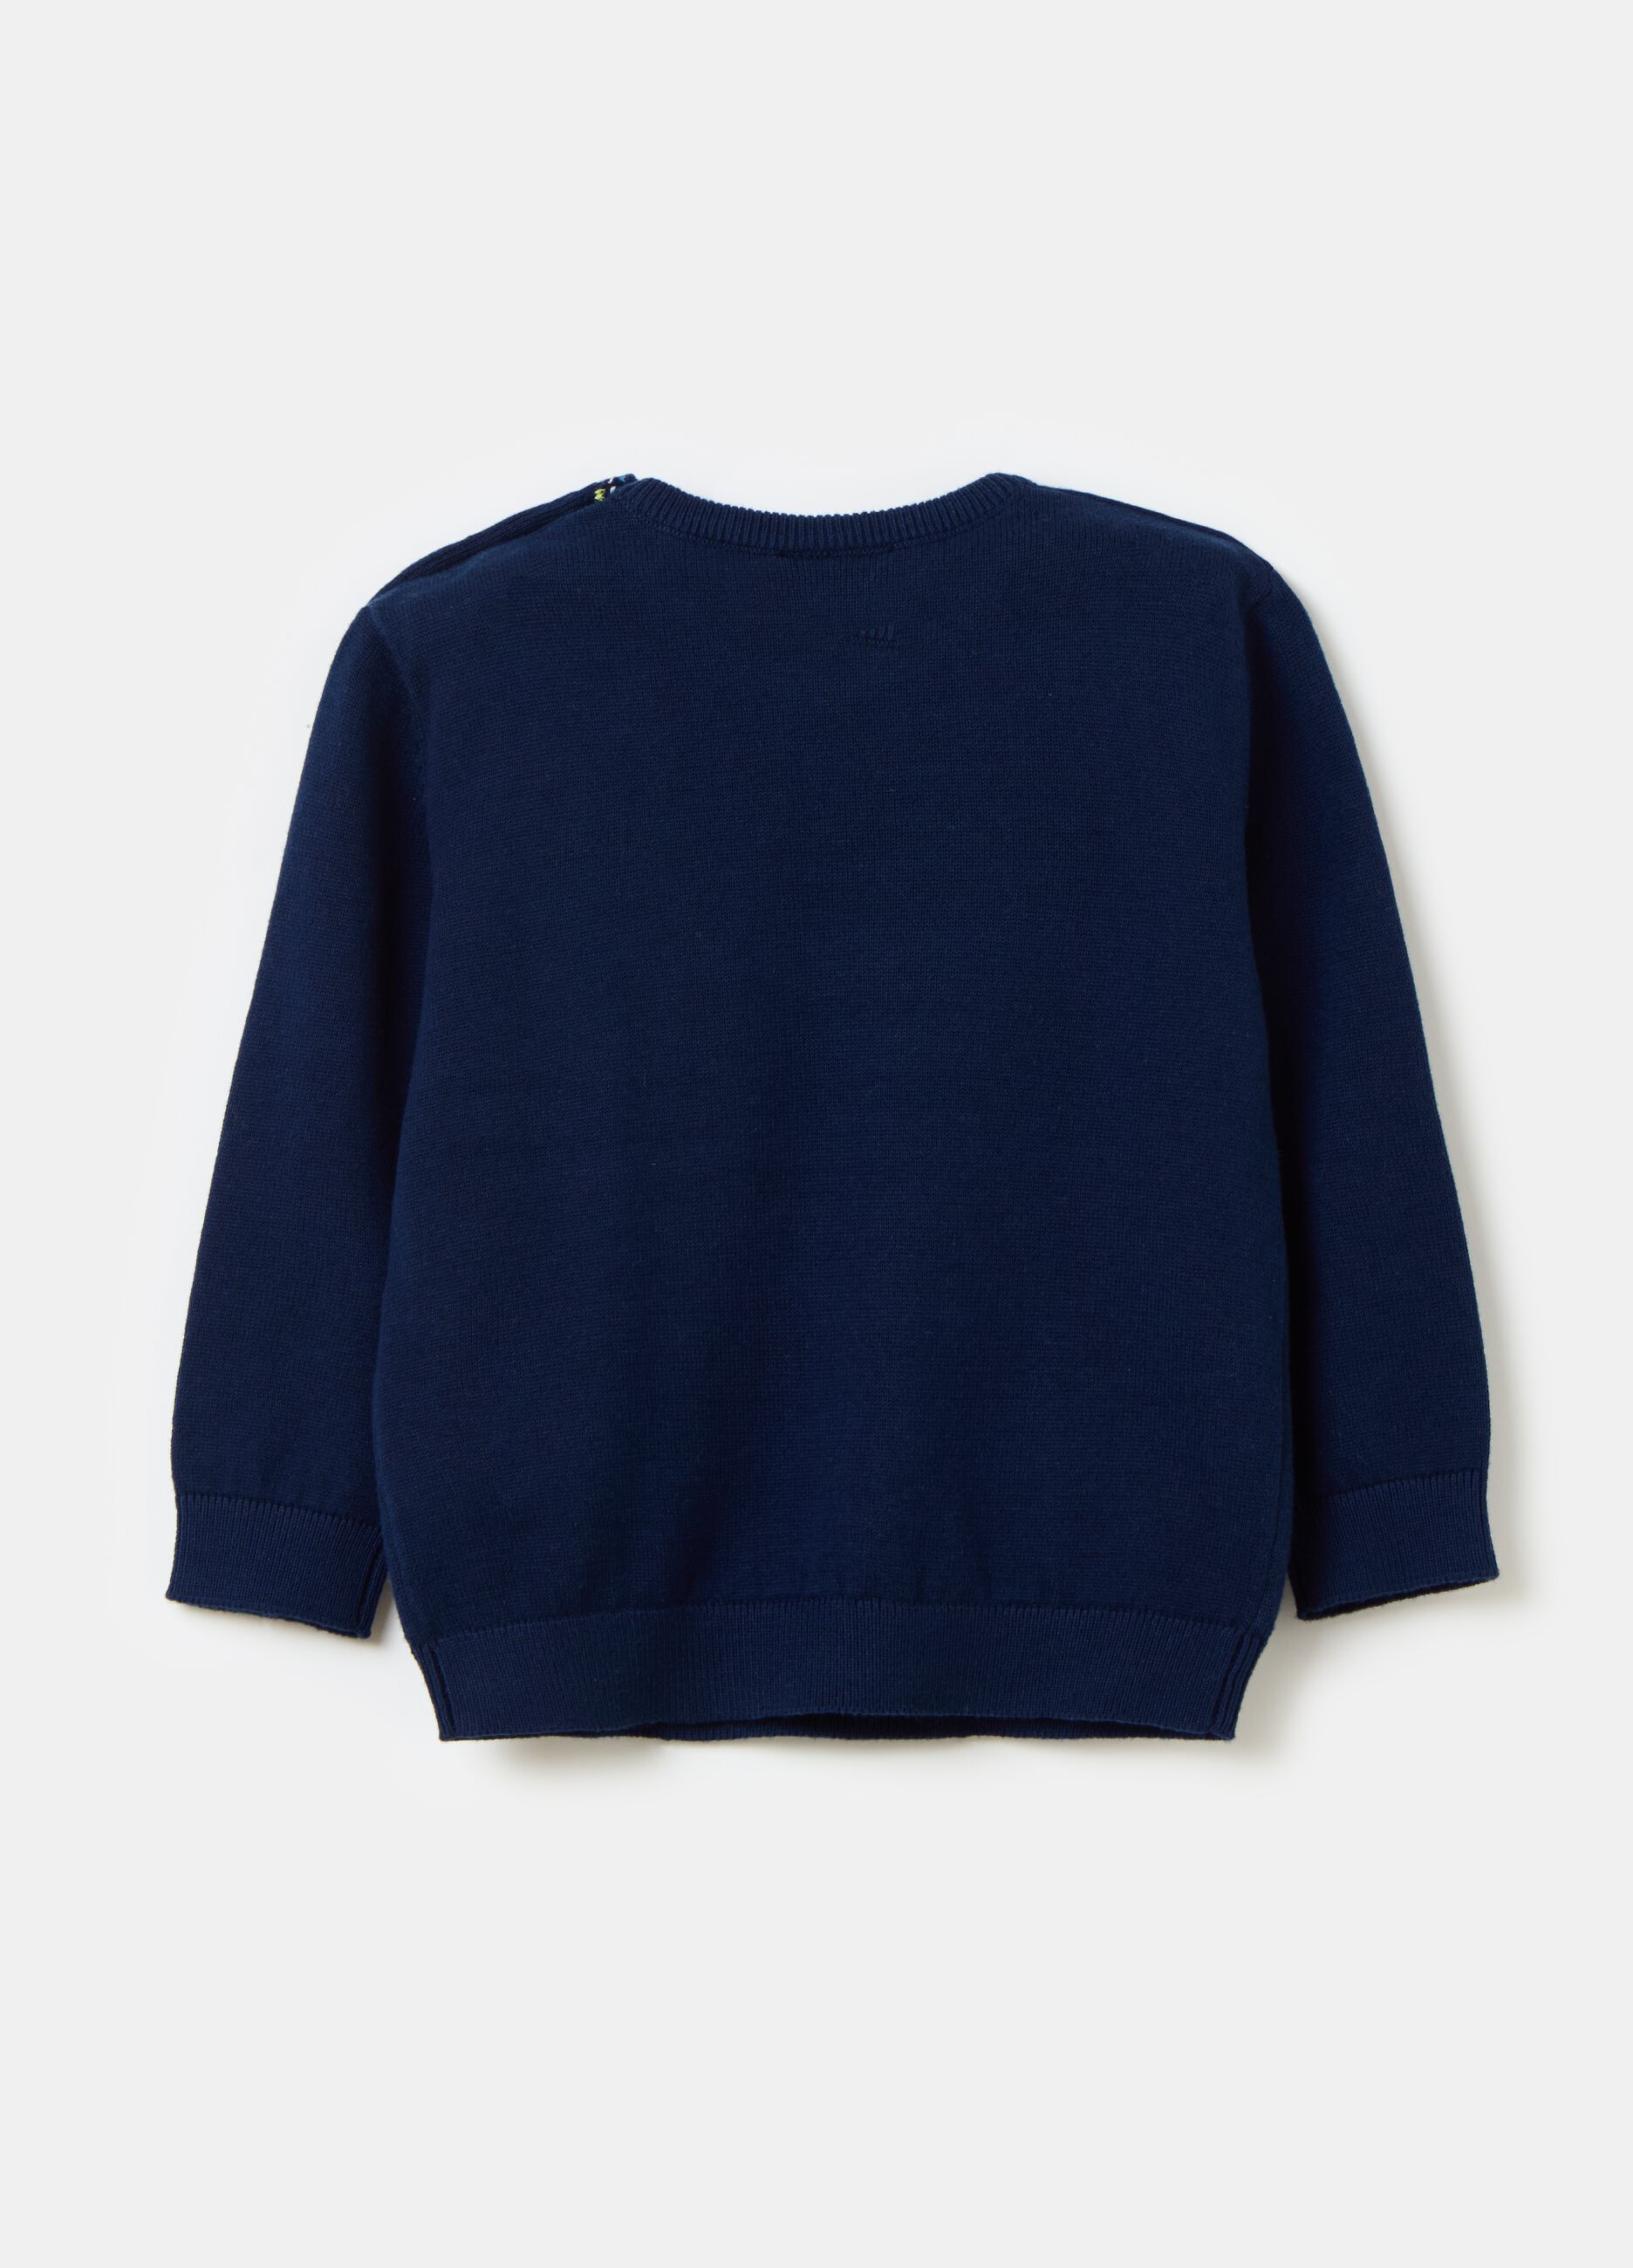 Cotton pullover with jacquard design